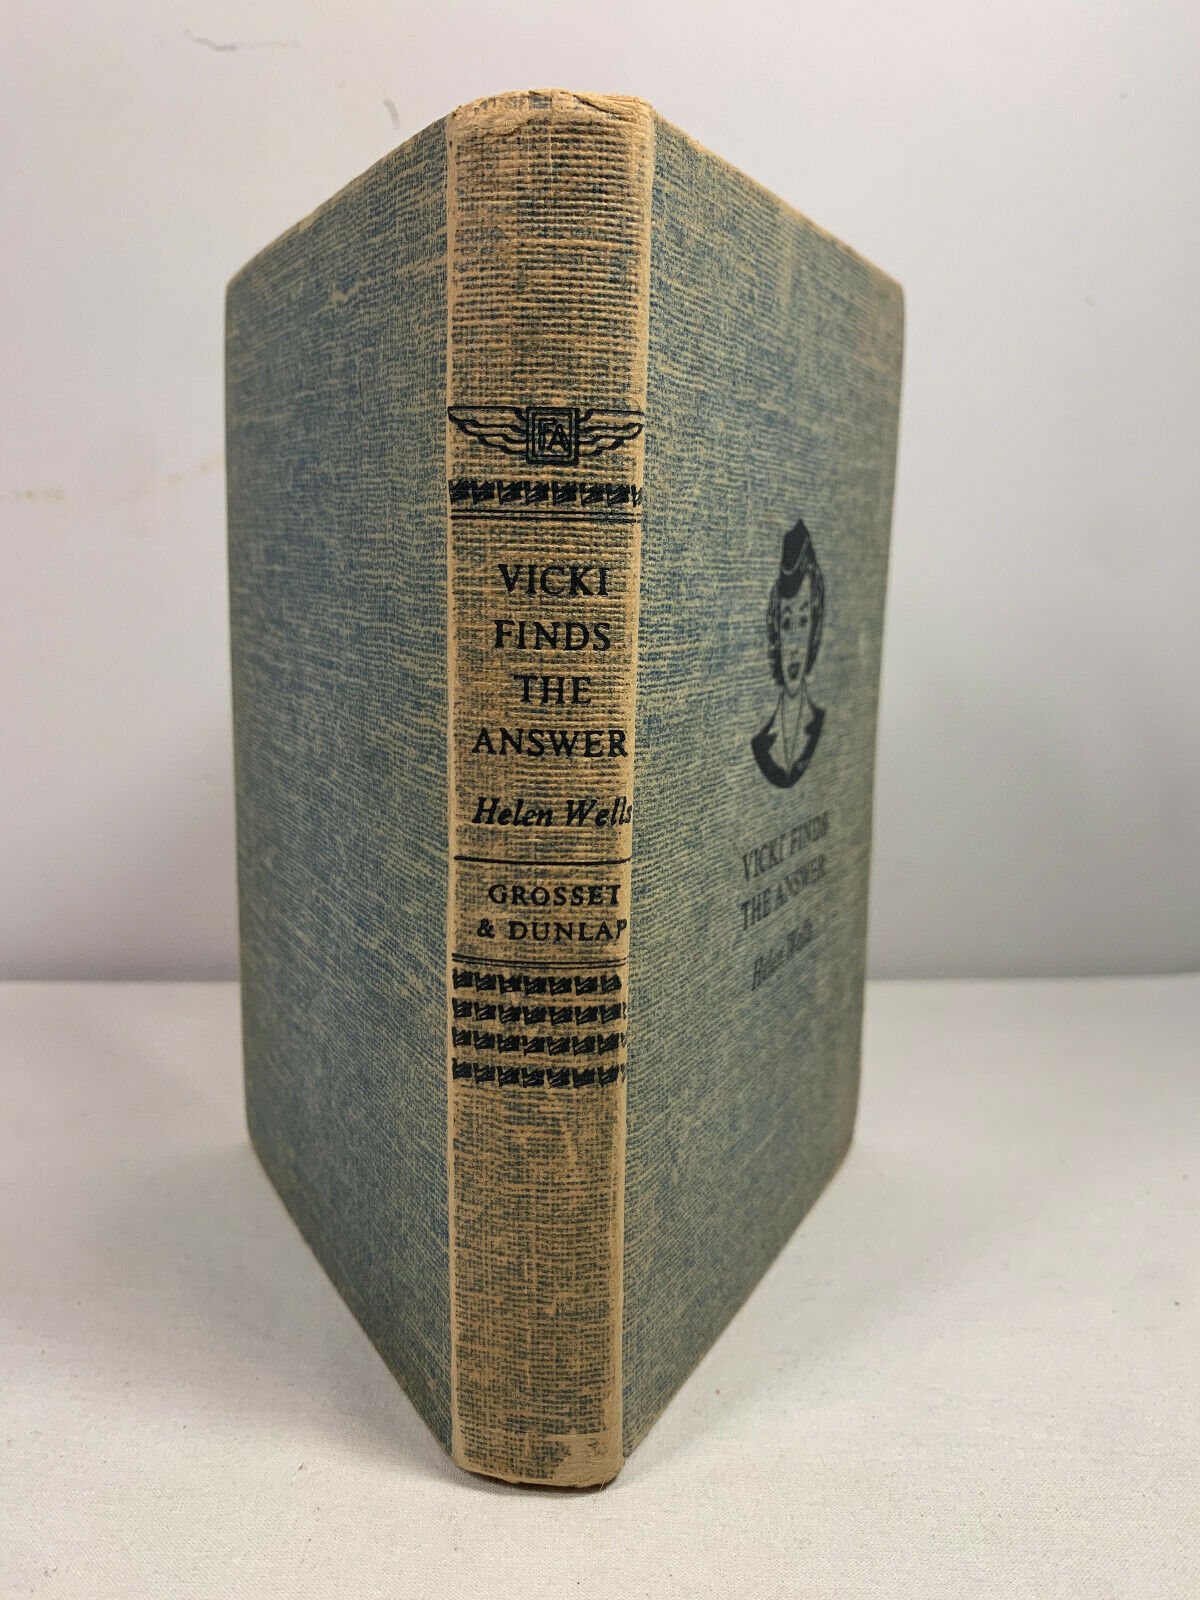 Vicki Finds the Answers by Helen Wells 1947